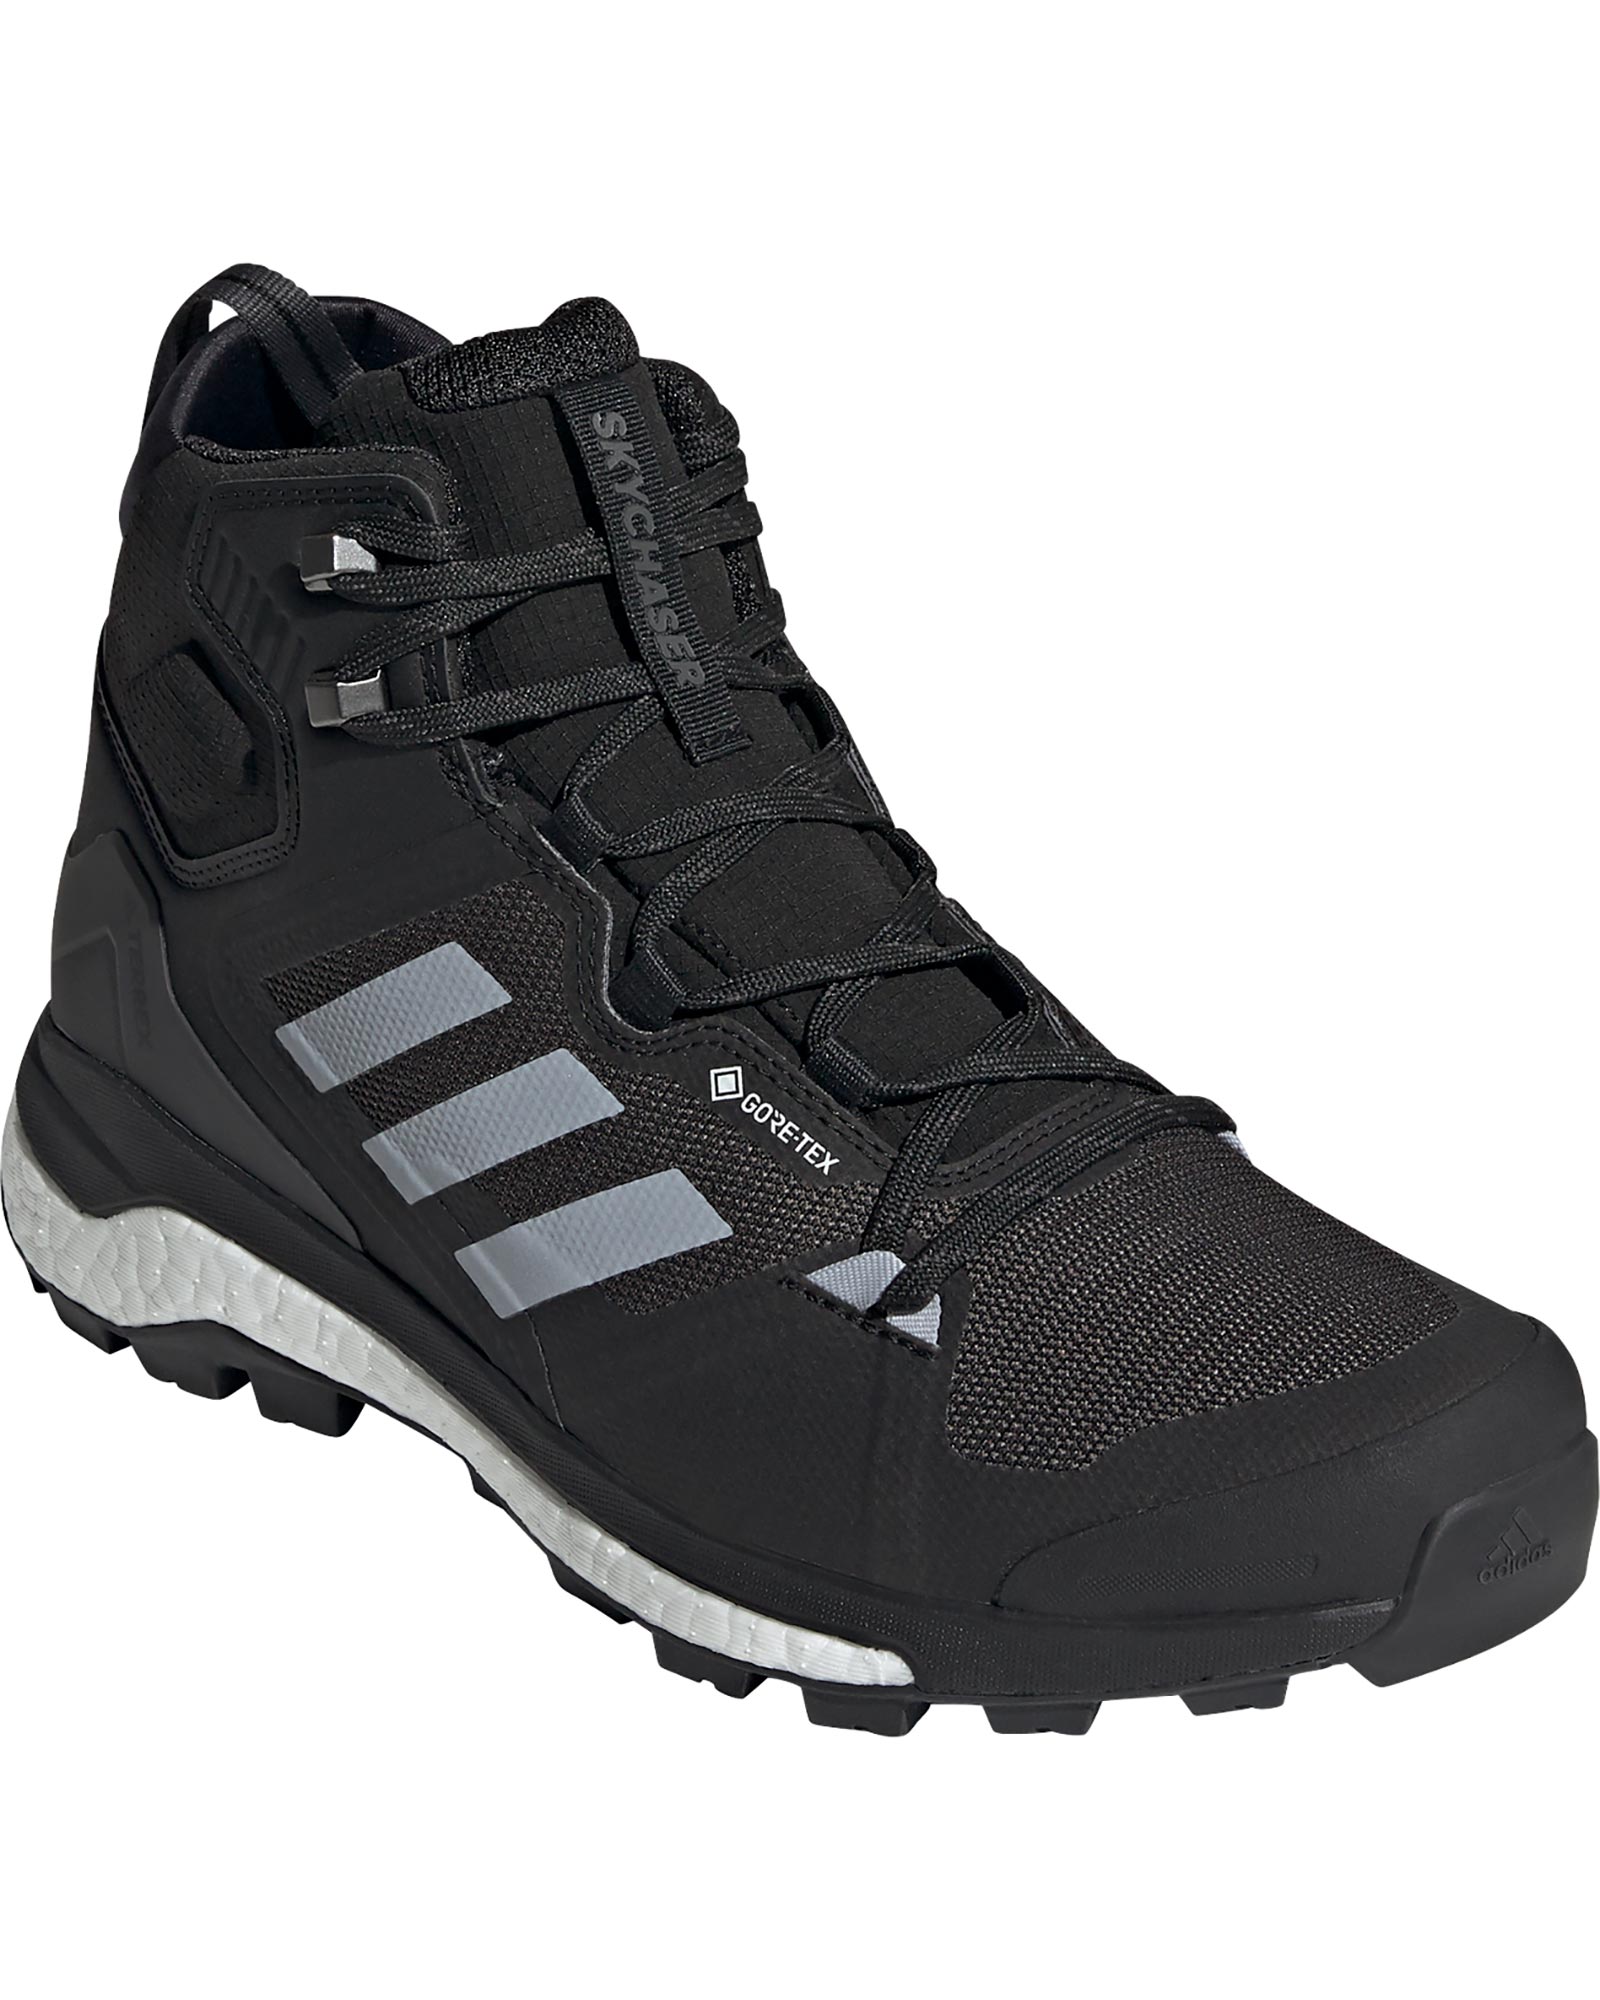 adidas TERREX Skychaser 2 Mid GORE TEX Men’s Boots - Core Black/Halo Silver/Dgh Solid Grey UK 8.5